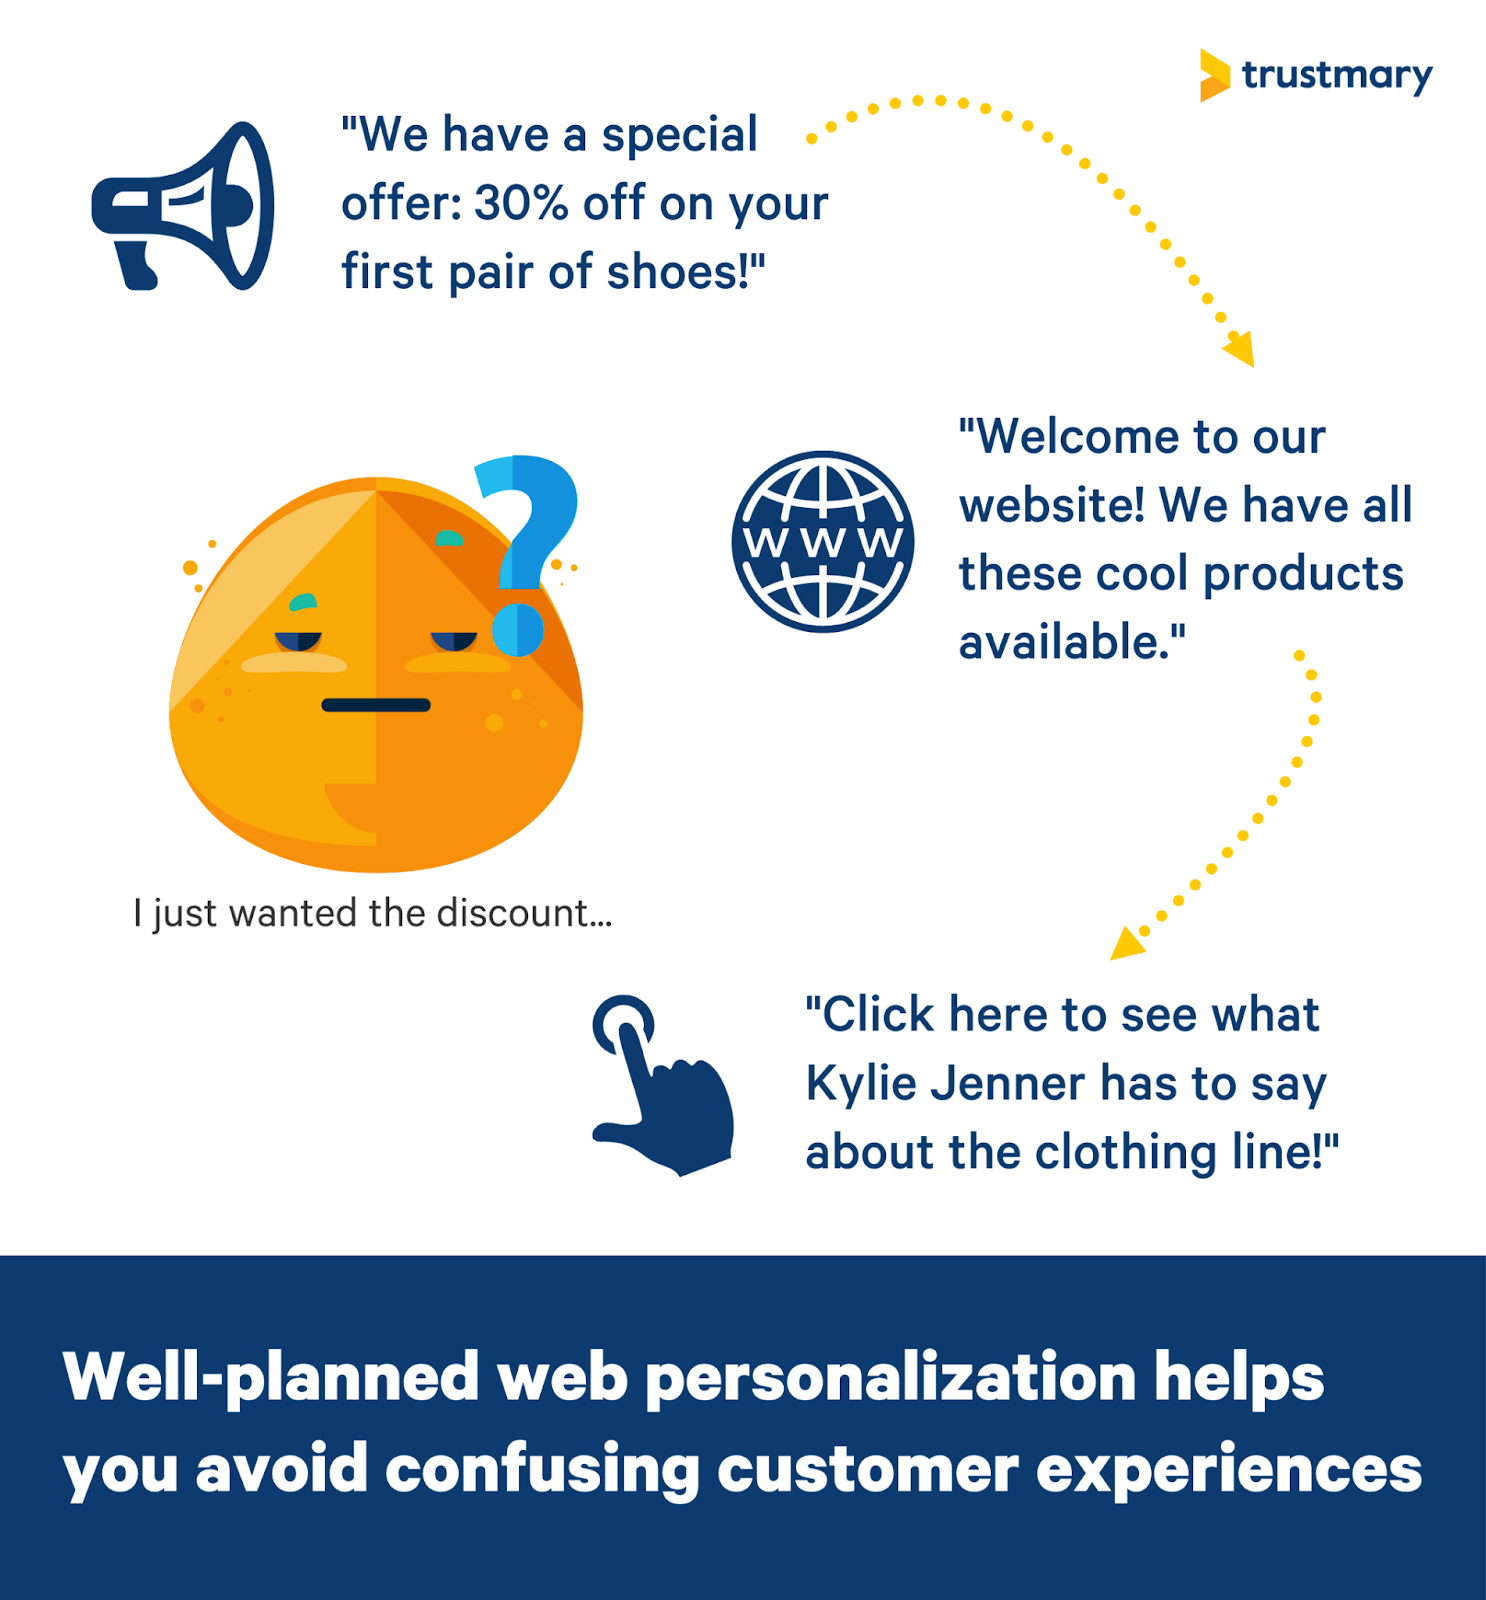 personalization makes customer experience coherent